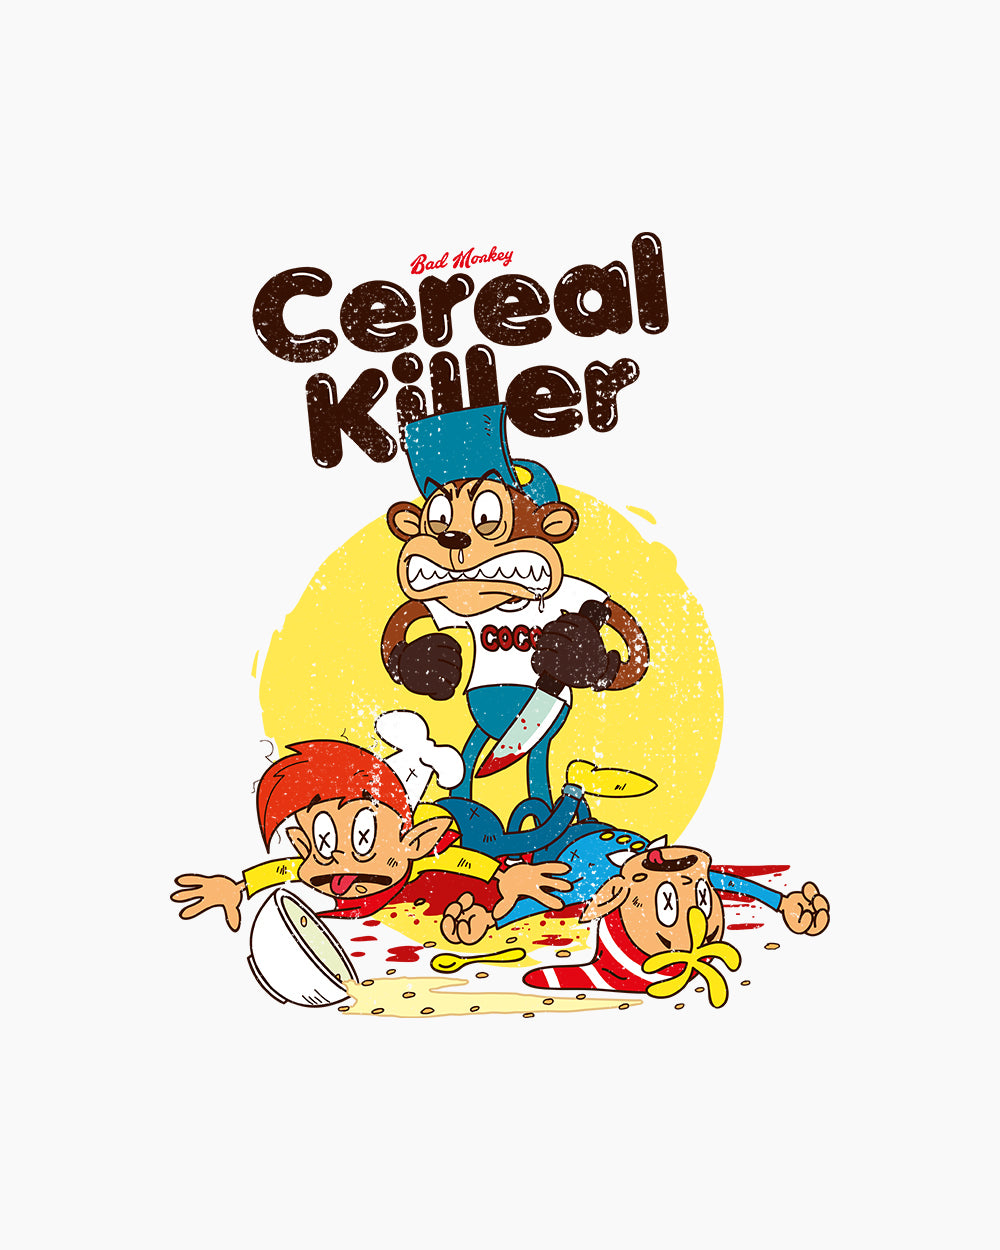 Cereal Killer Hoodie Europe Online #colour_white